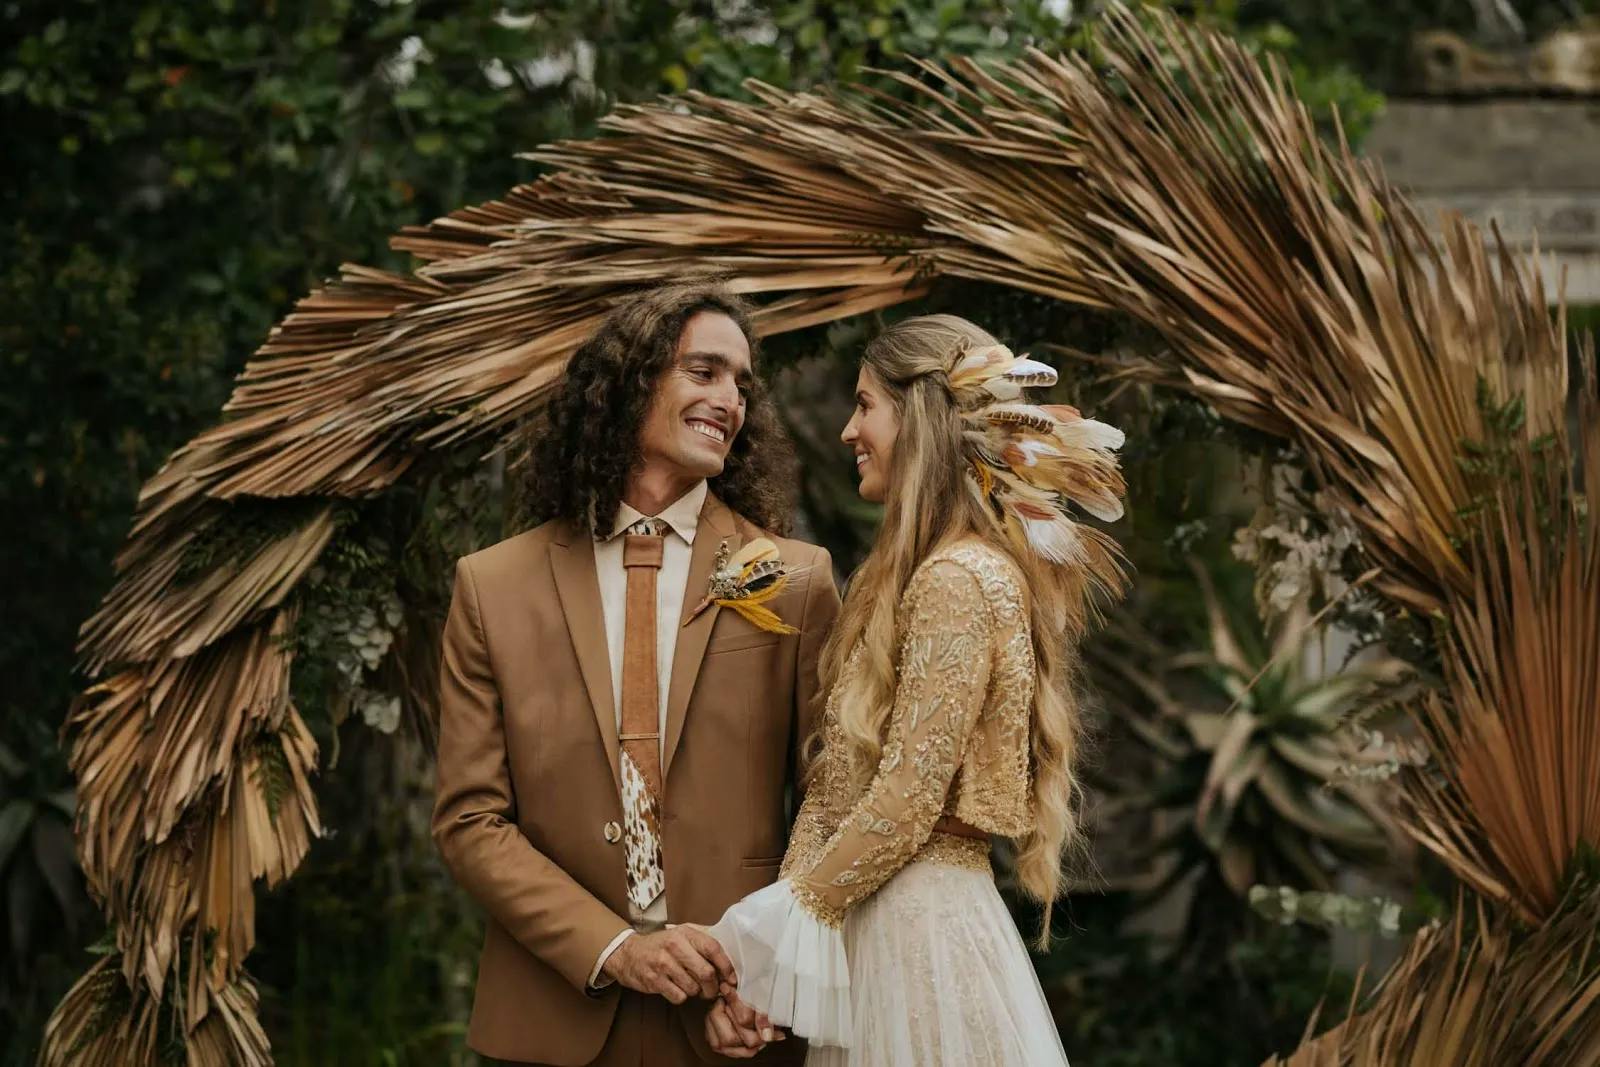 A couple stands holding hands and smiling at each other in front of a rustic, circular arbor made of dried palm leaves. The man wears a brown suit with a floral tie and boutonnière, while the woman dons a lace top, tulle skirt, and feather hair accessories.